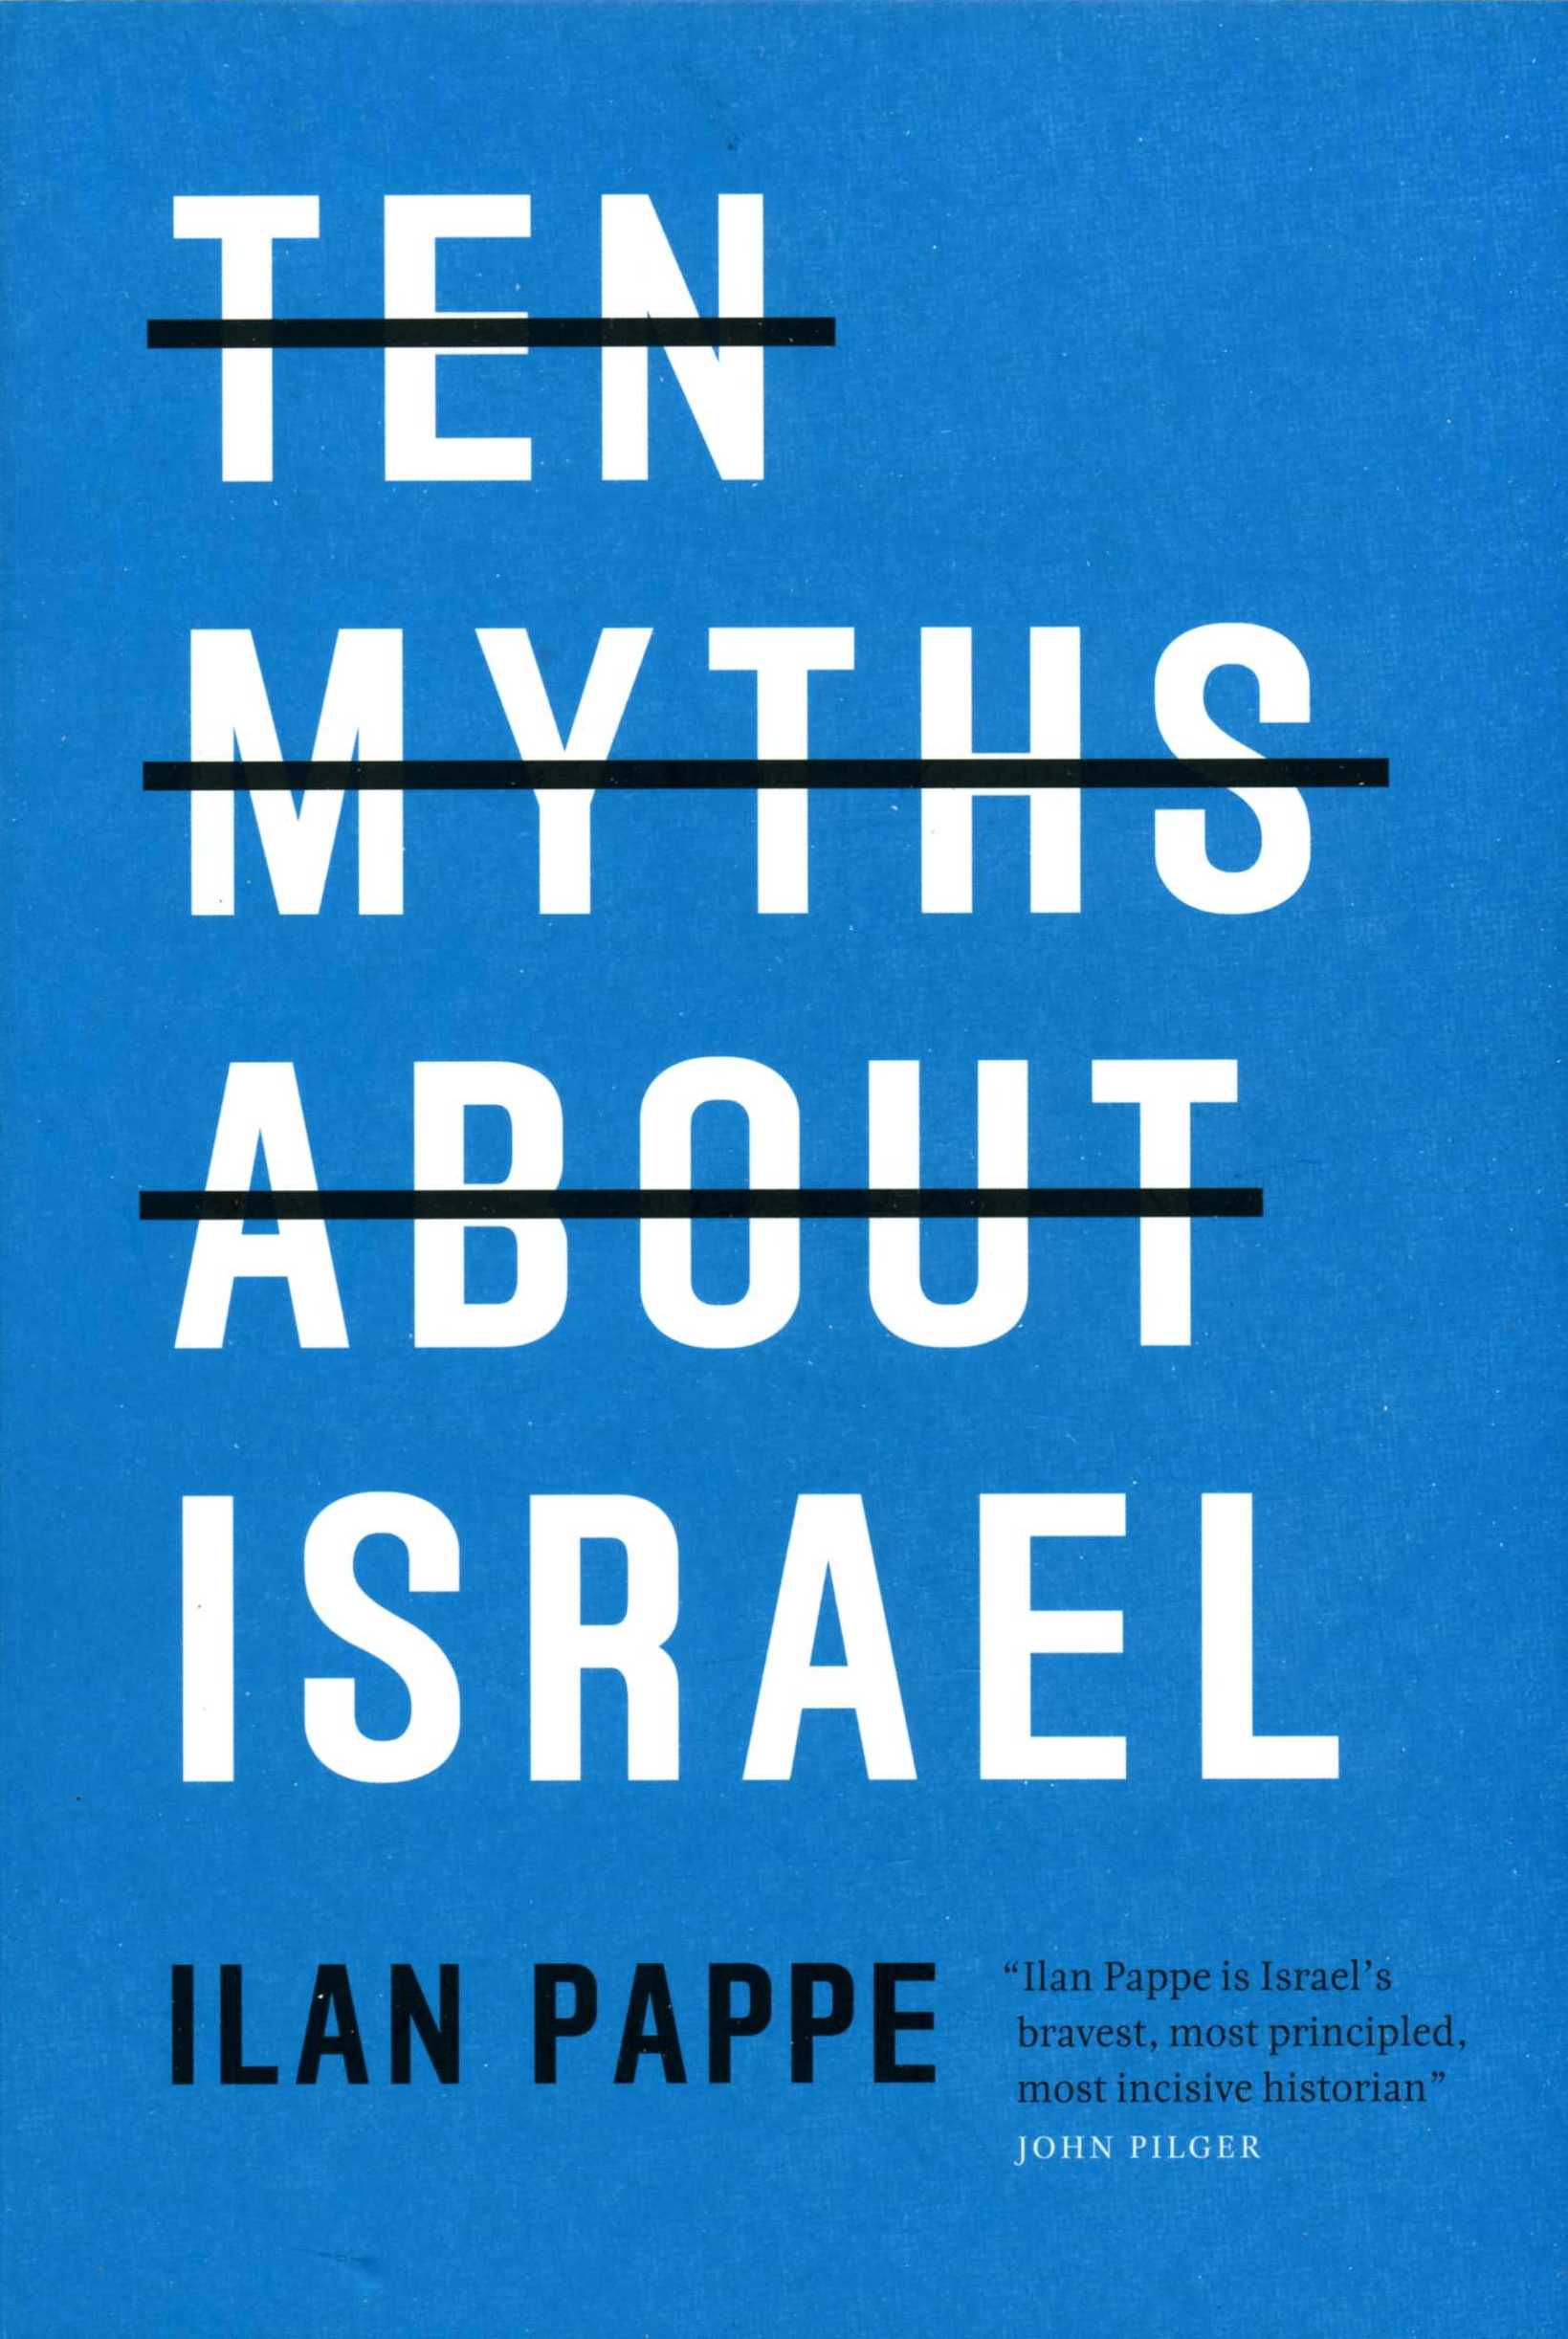 Cover of Pappe's "Ten Myths about Israel" (published by Verso Books)